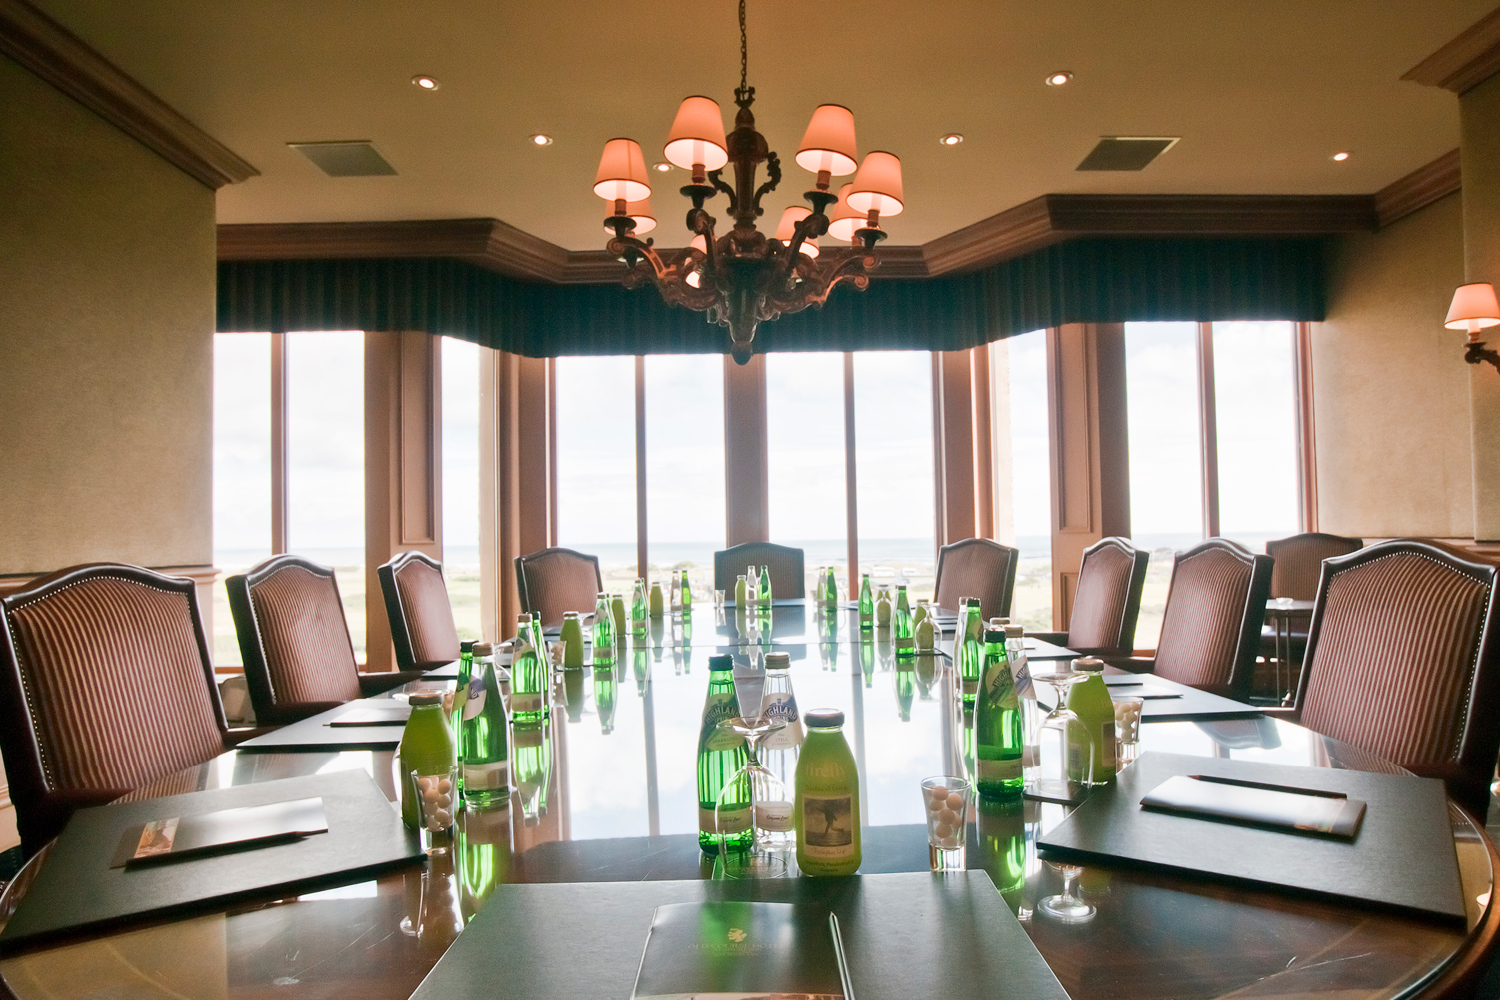 Image of Meeting Room Old Course Hotel Golf Resort & Spa Scotland United Kingdom, Request For Proposal